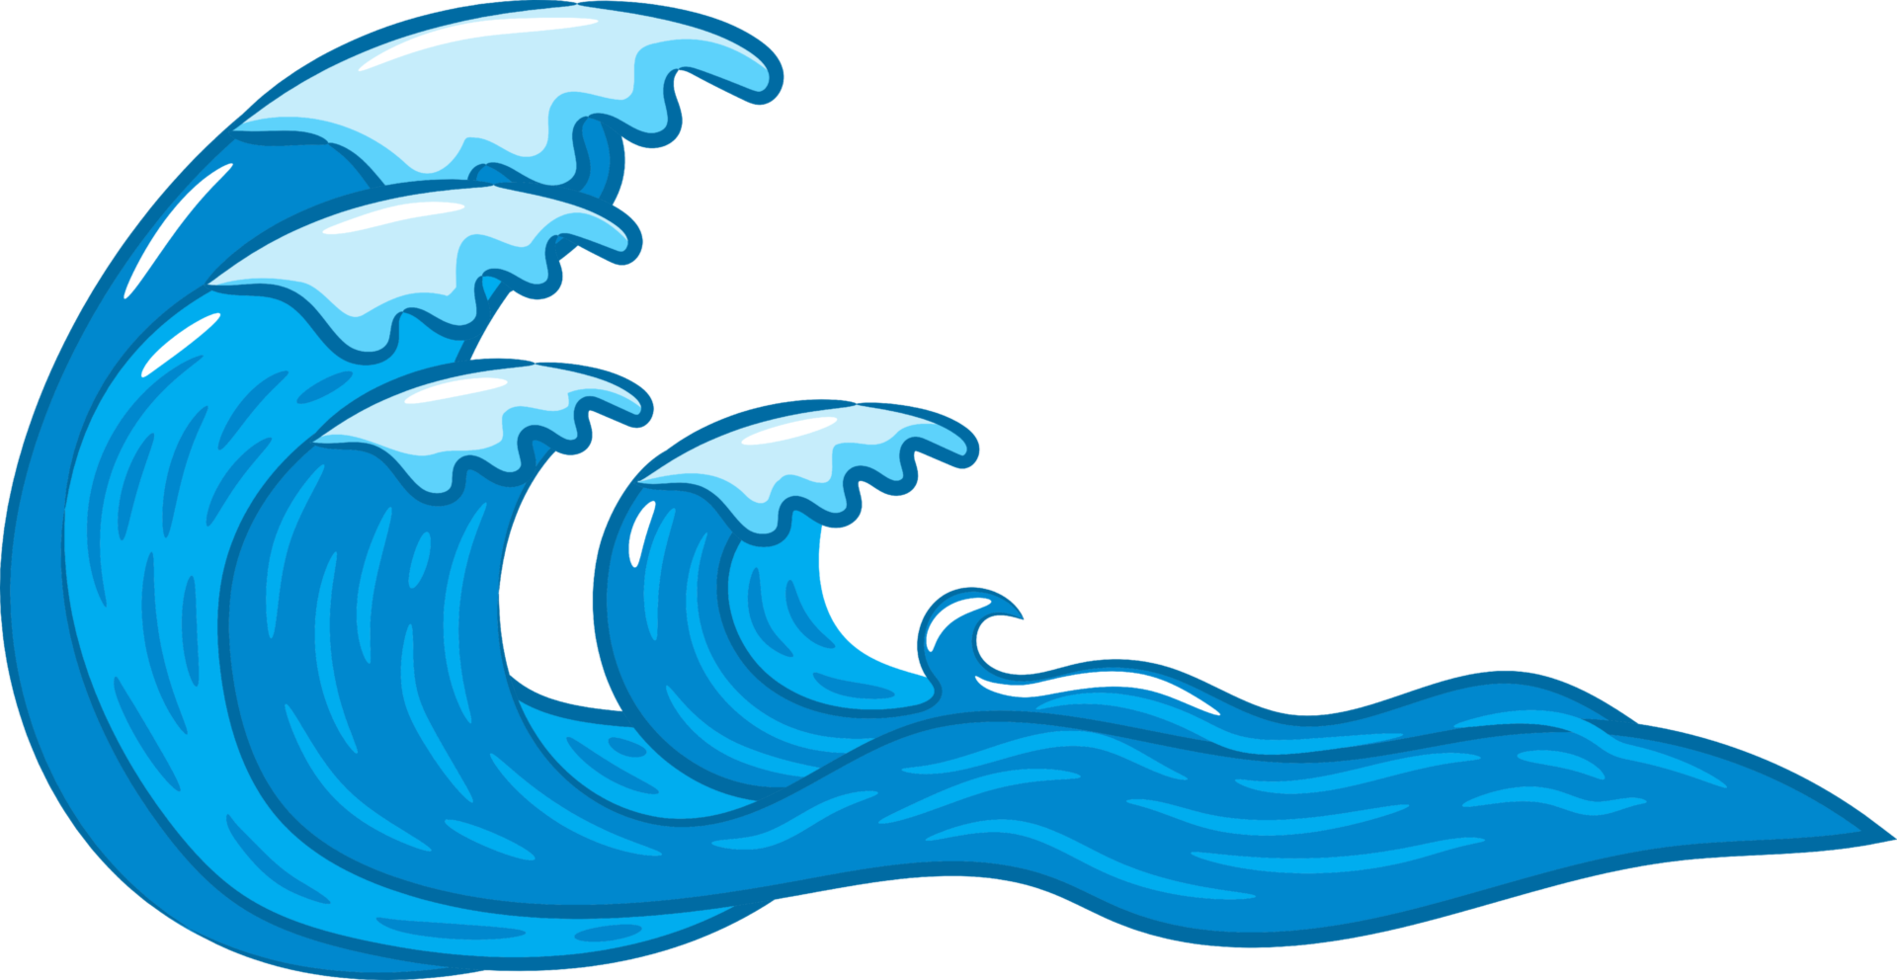 wave-graphic-clipart-design-free-png.png